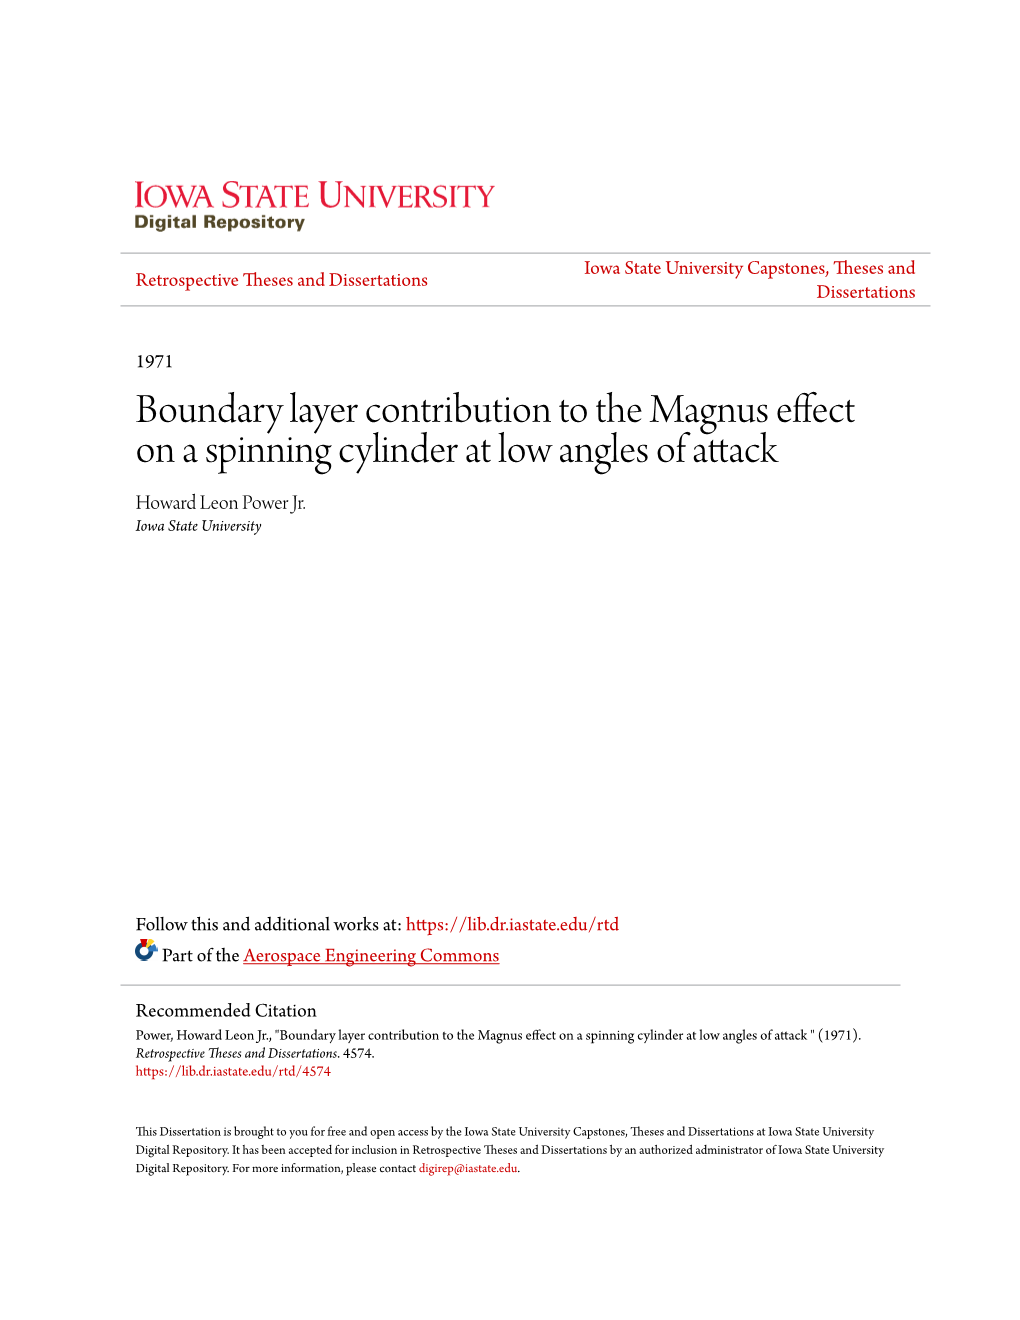 Boundary Layer Contribution to the Magnus Effect on a Spinning Cylinder at Low Angles of Attack Howard Leon Power Jr